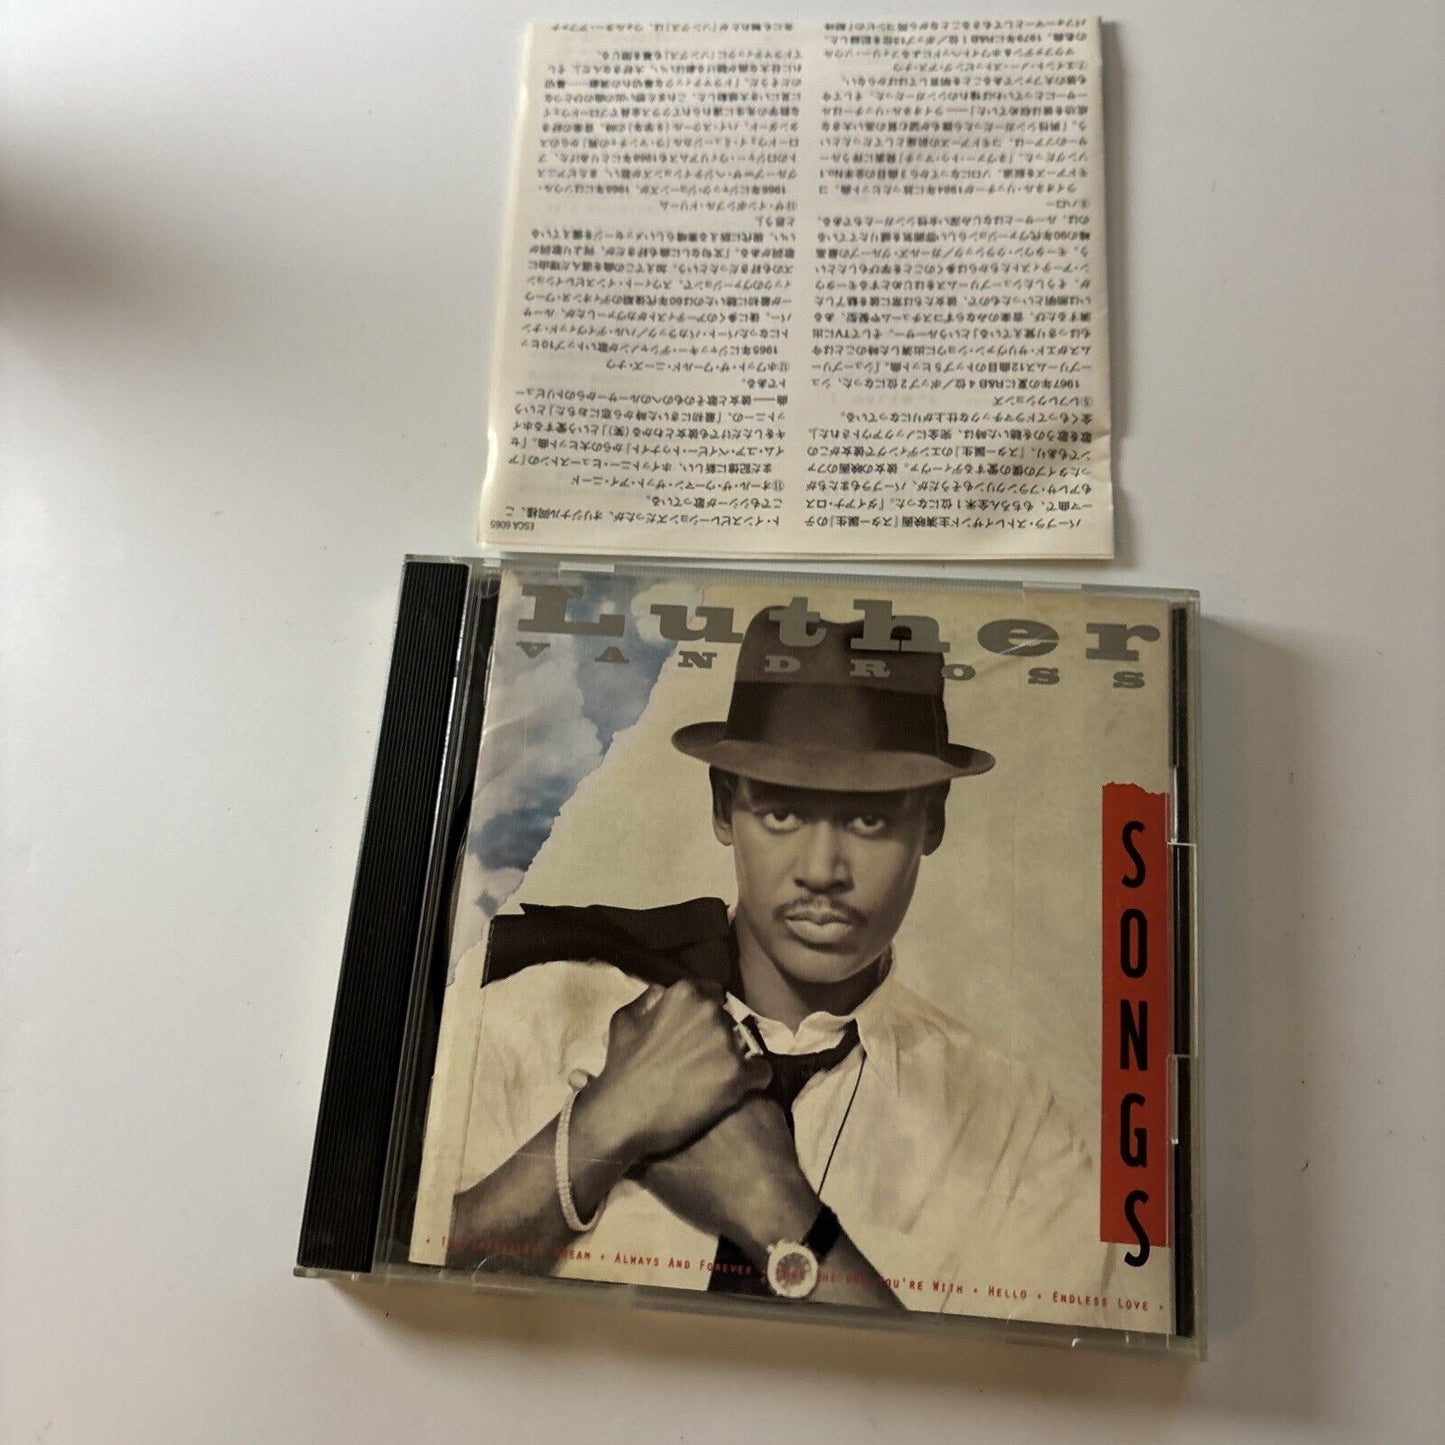 Luther Vandross - Epic Songs (CD, 1994) Japan ESCA-6065